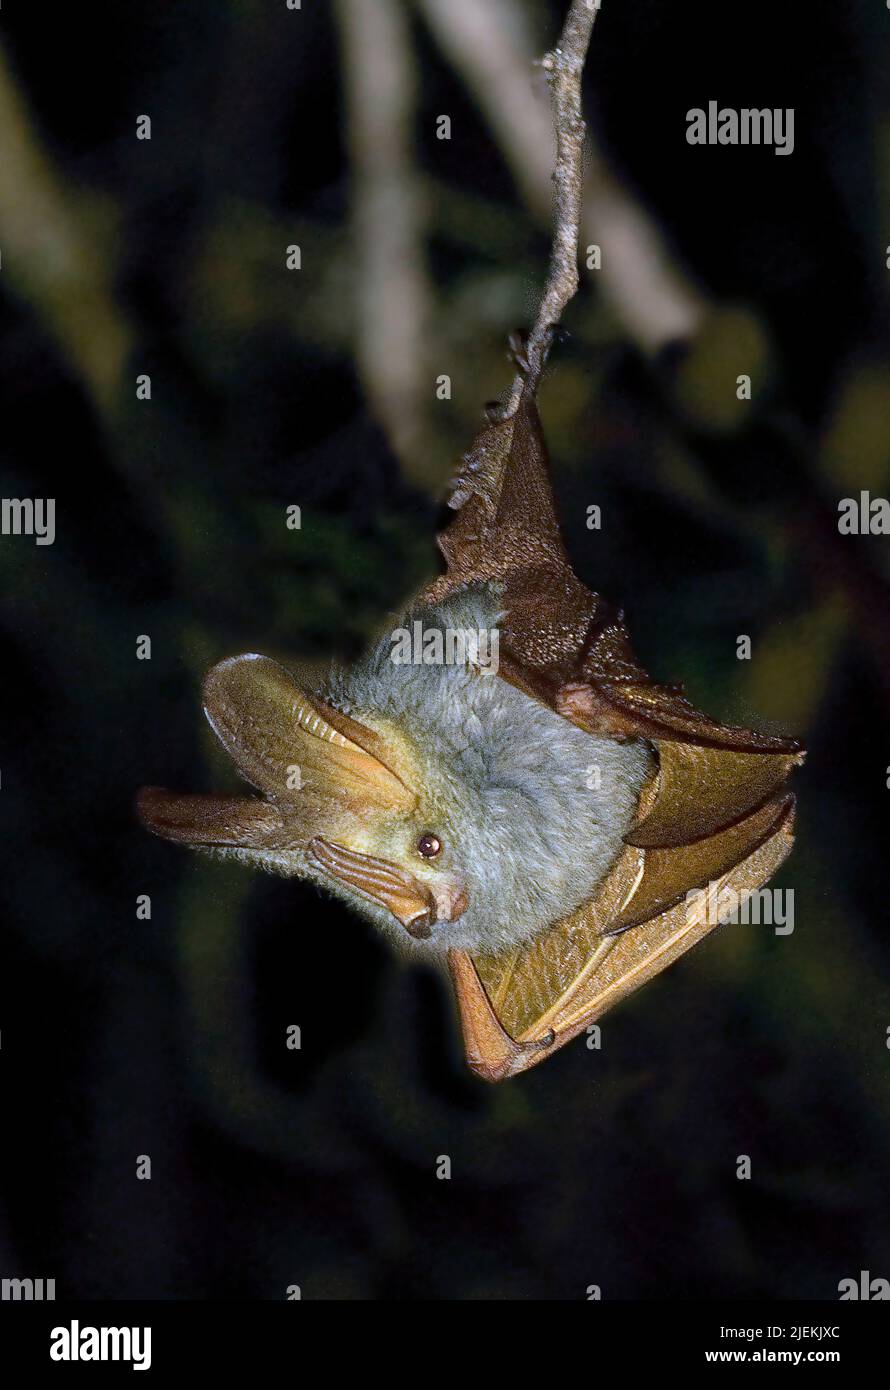 Yellow-winged Bat, Lavia frons, from central Kenya. Stock Photo